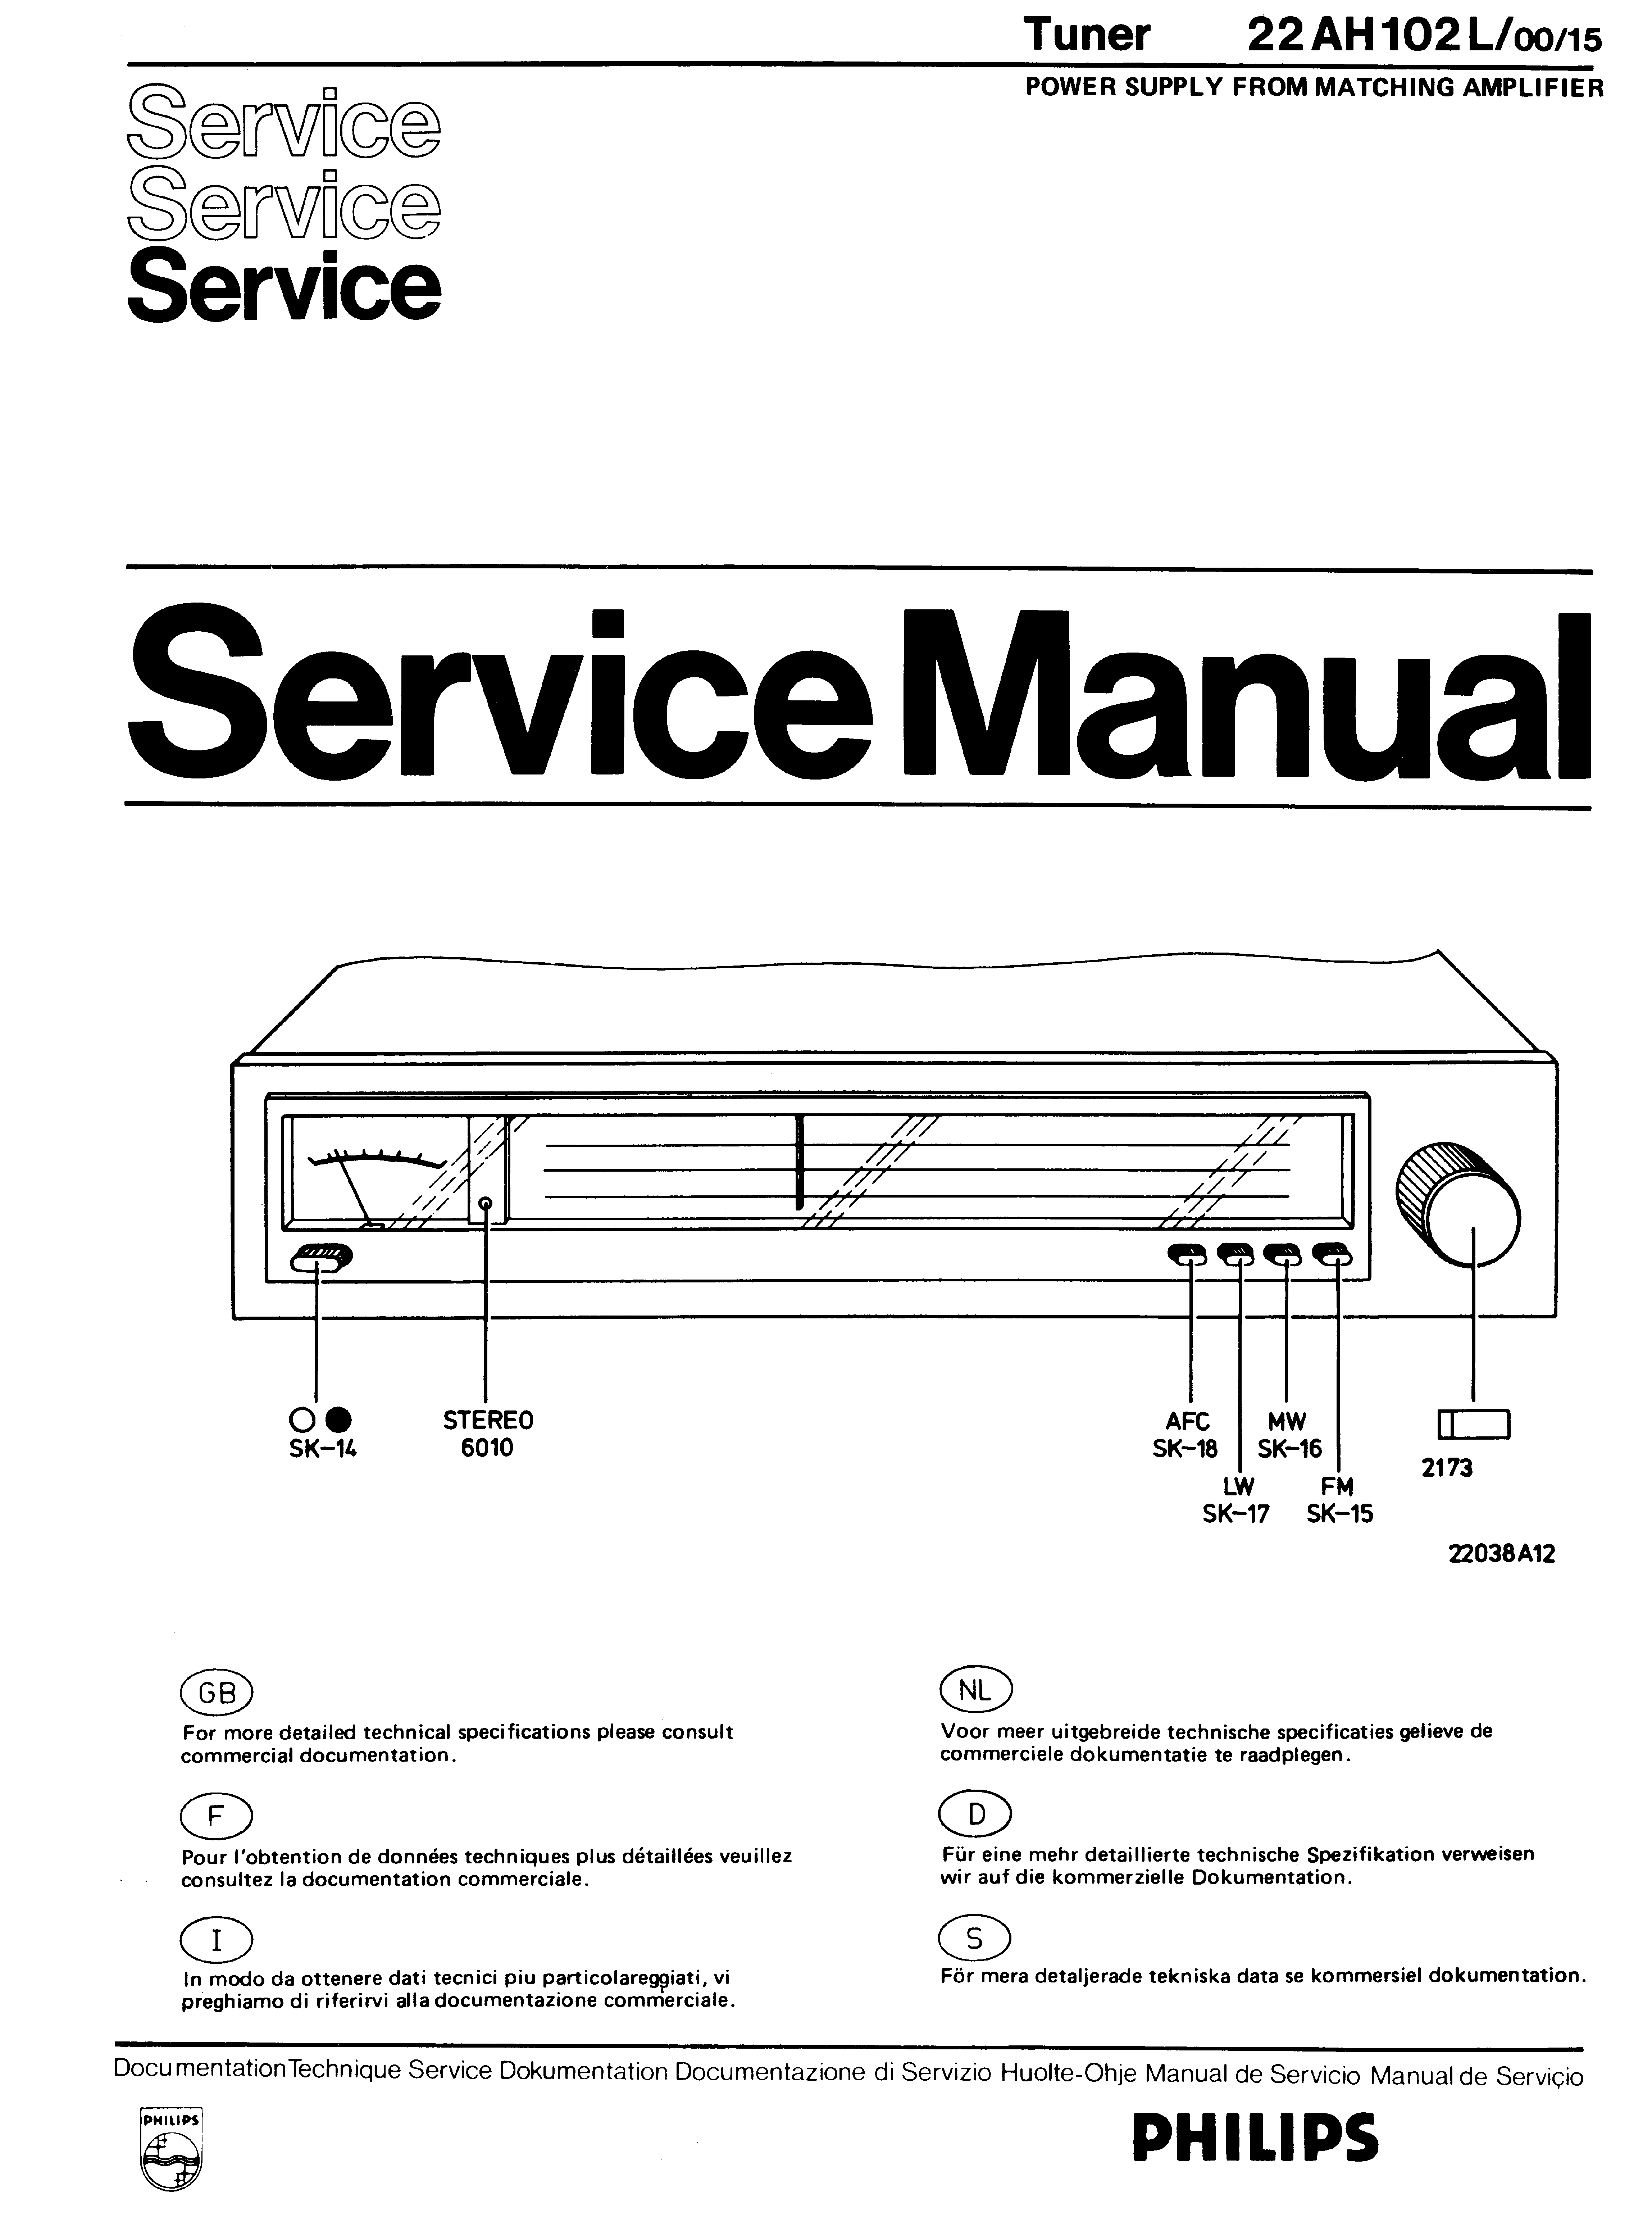 PHILIPS TUNER 22AH102L SM service manual (1st page)